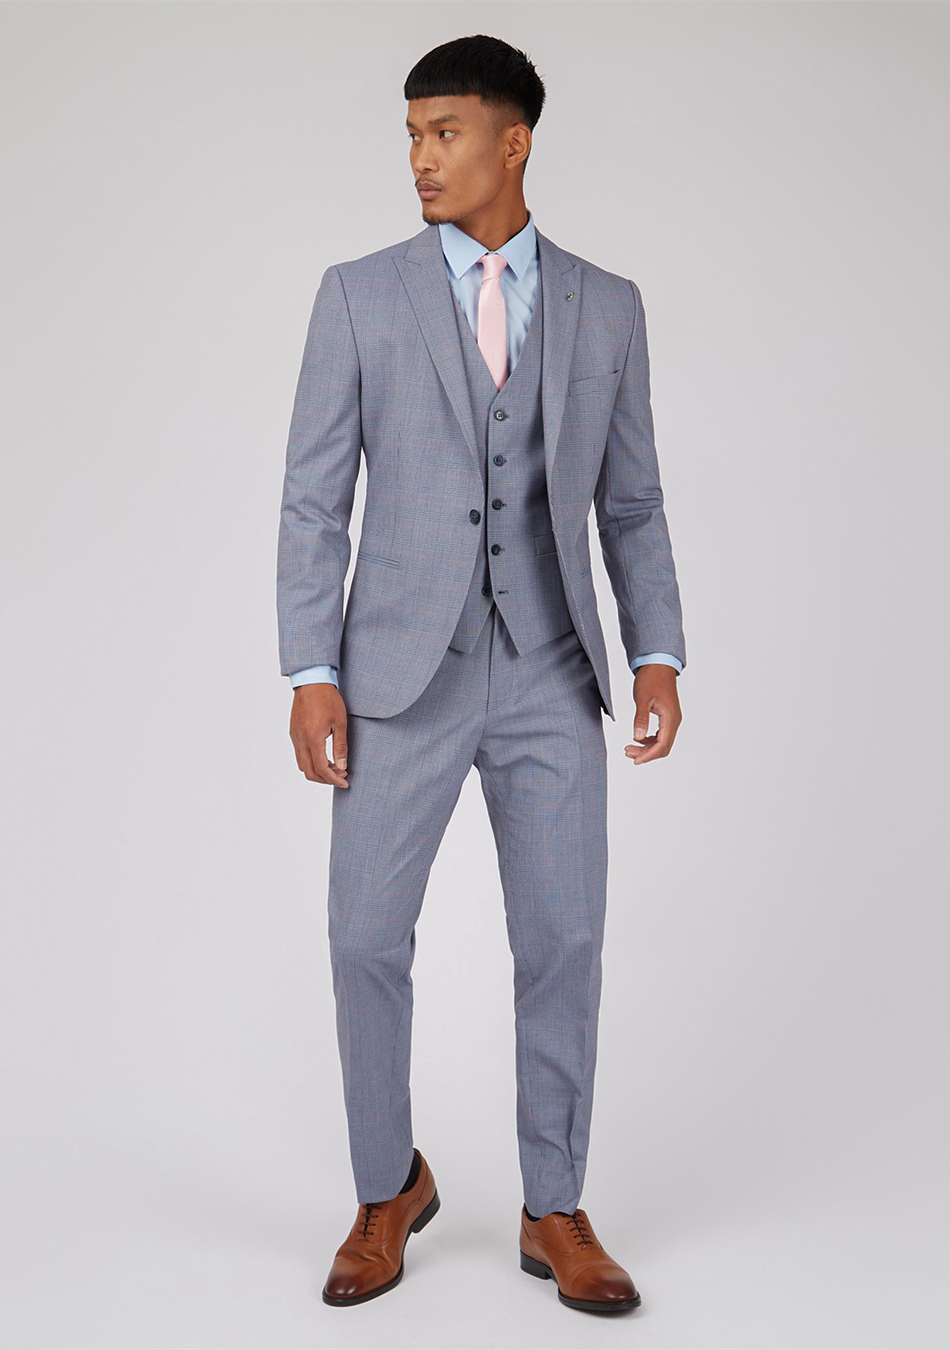 Grey three-piece suit, blue dress shirt, pink tie, and brown Oxford shoes